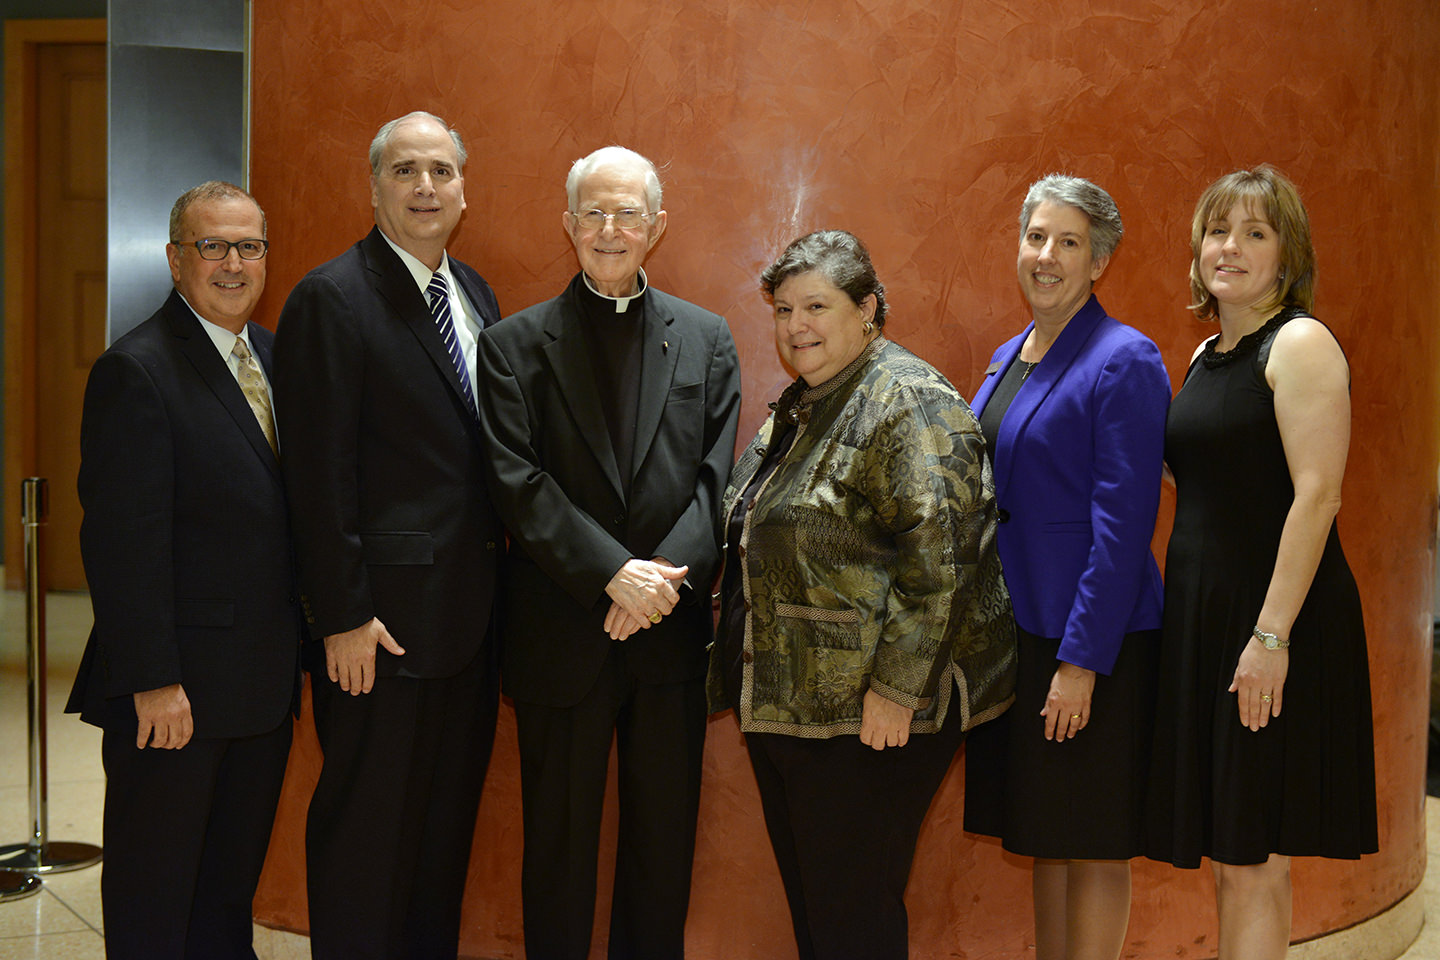 From left is dinner committee chair John Matteo, honorees John Treseler, Bishop William G. Curlin and Patricia McGuire, and SOAR! president Sister Kathleen Lunsmann, IHM and board chair Kathryn Caballero. 